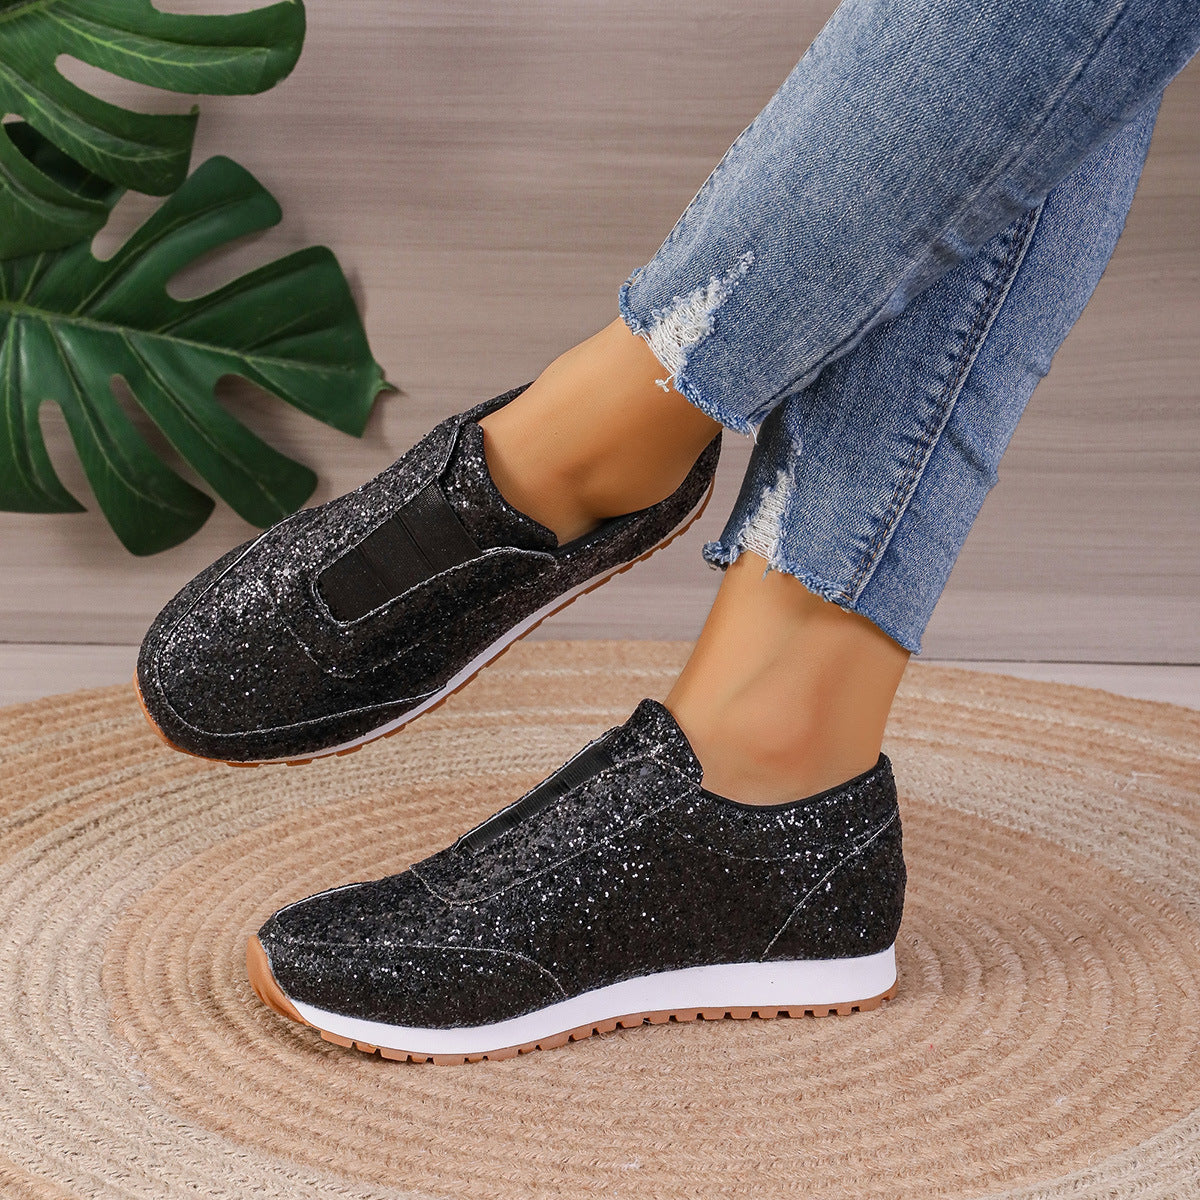 Gold Sliver Sequined Flats New Fashion Casual Round Toe Slip-on Shoes Women Outdoor Casual Walking Running Shoes - ROMART GLOBAL LTD